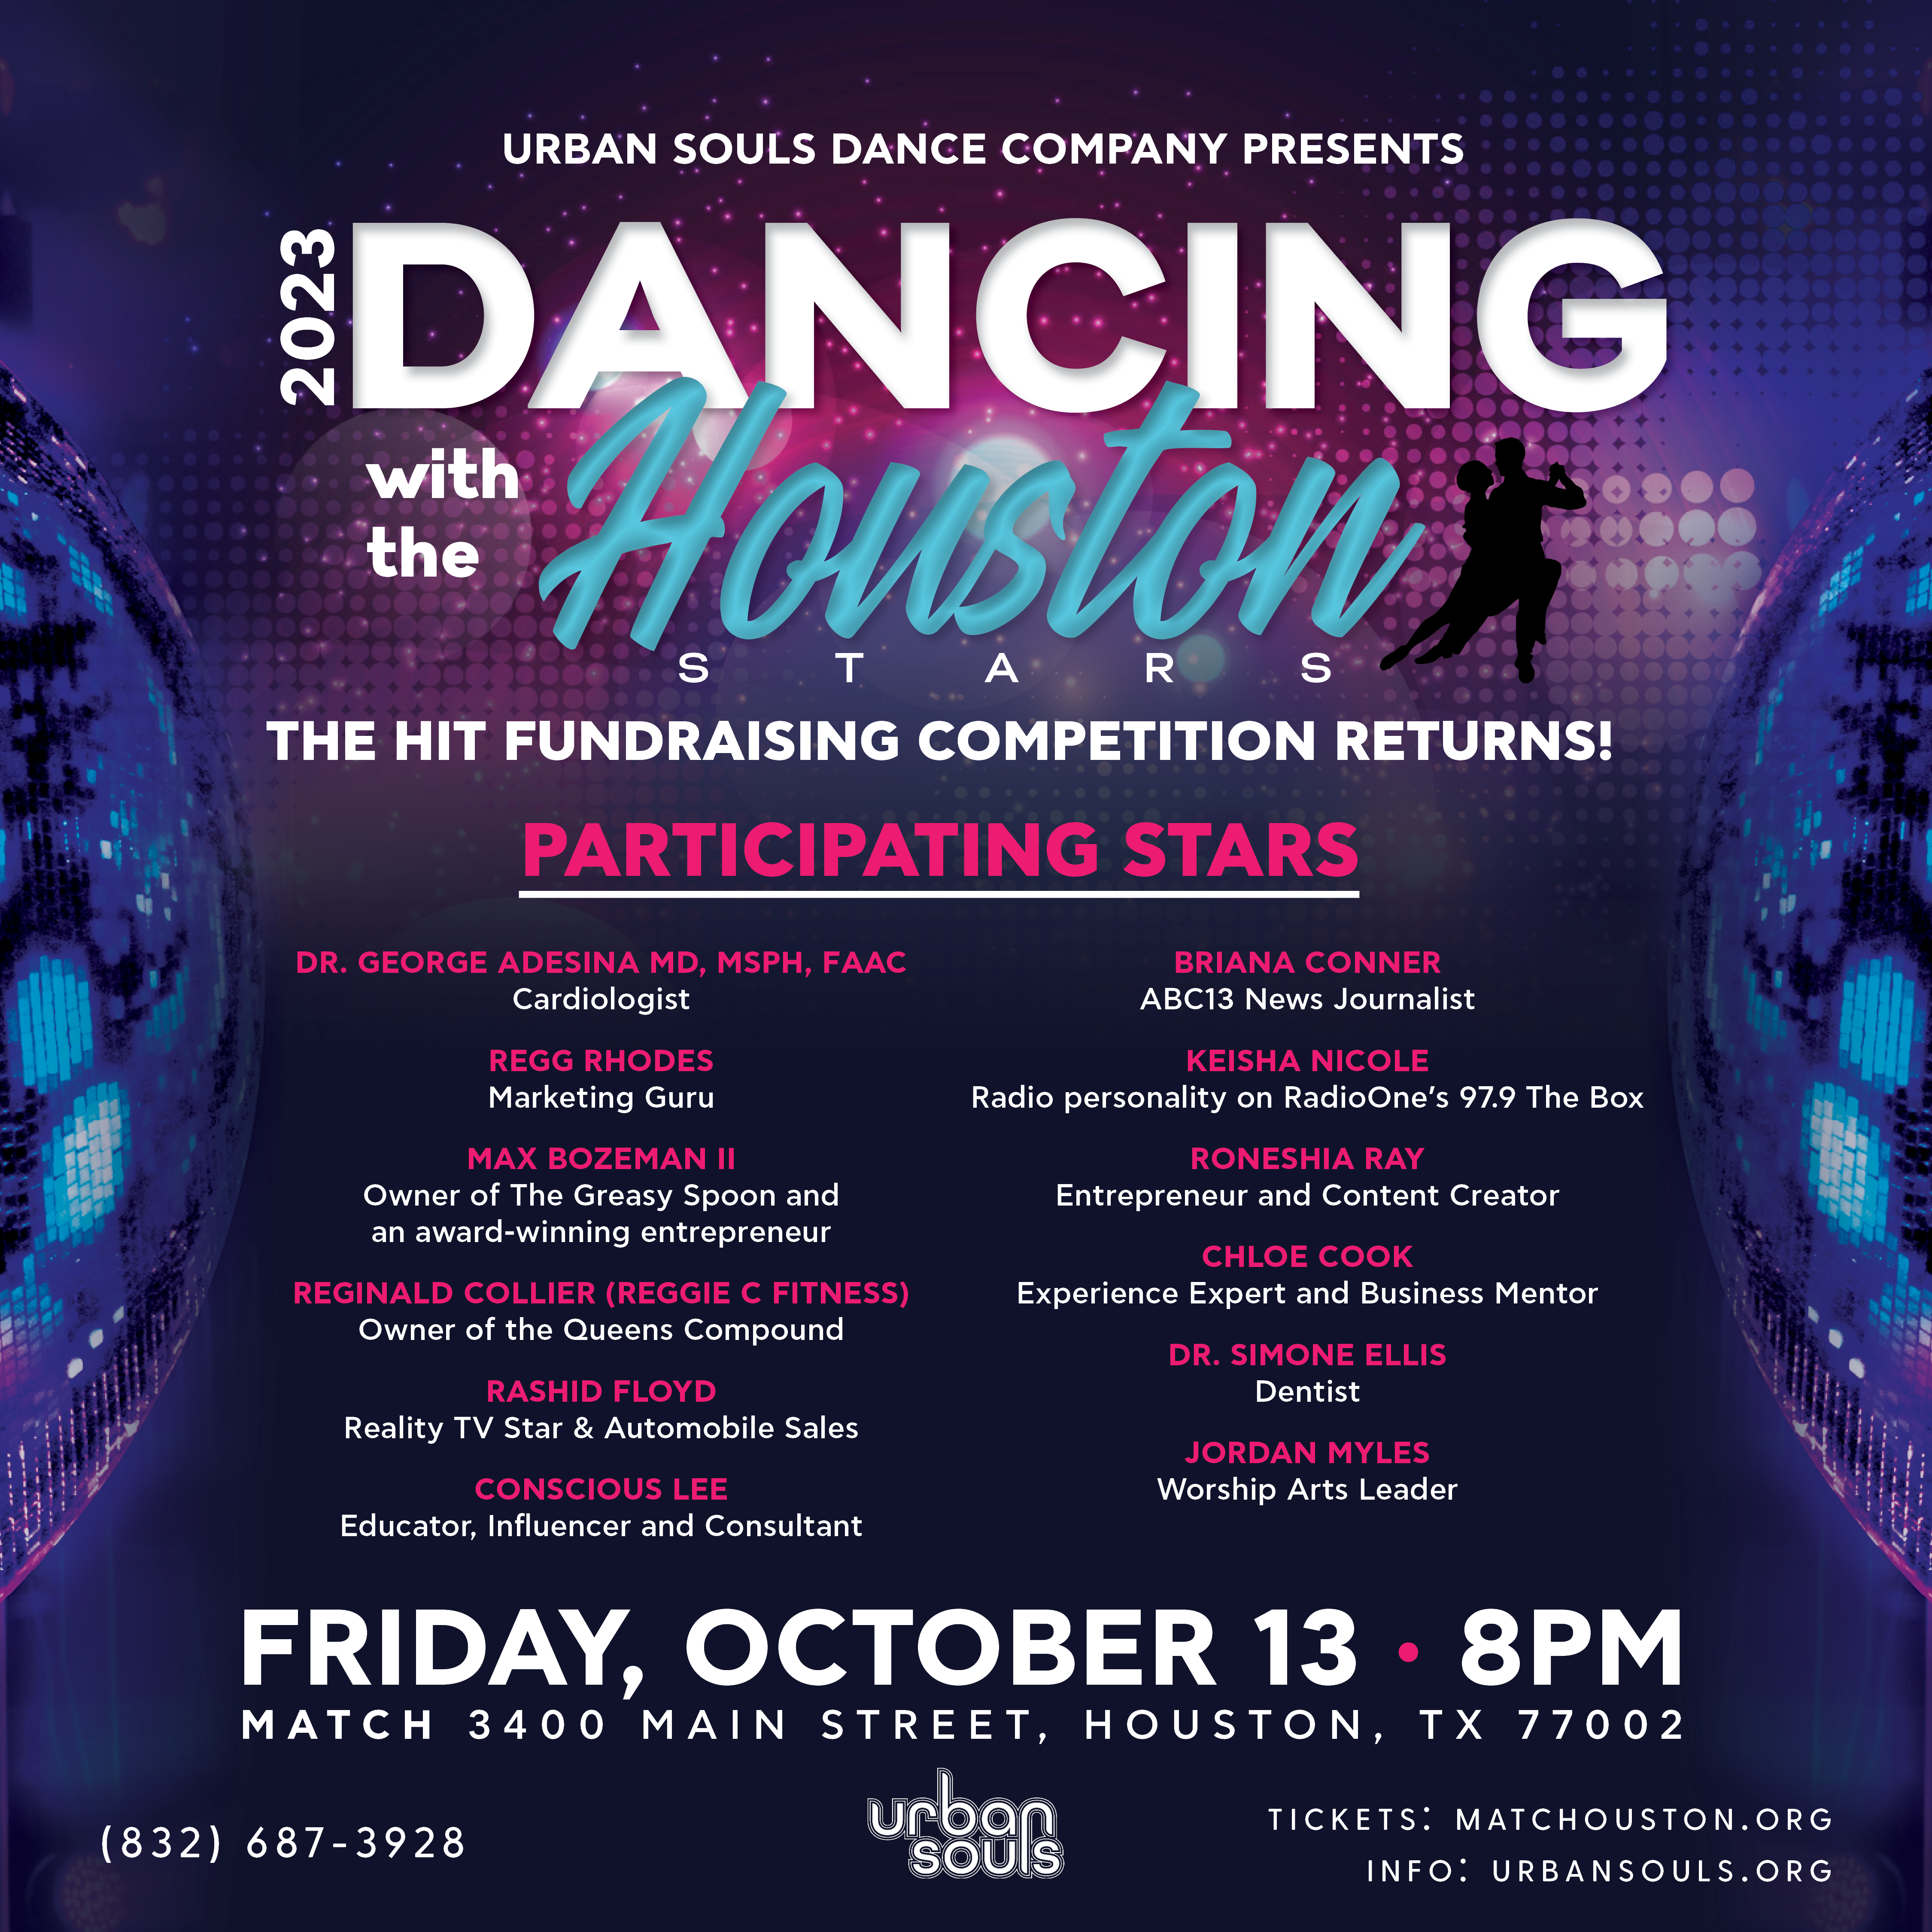 Dancing with the Houston Stars